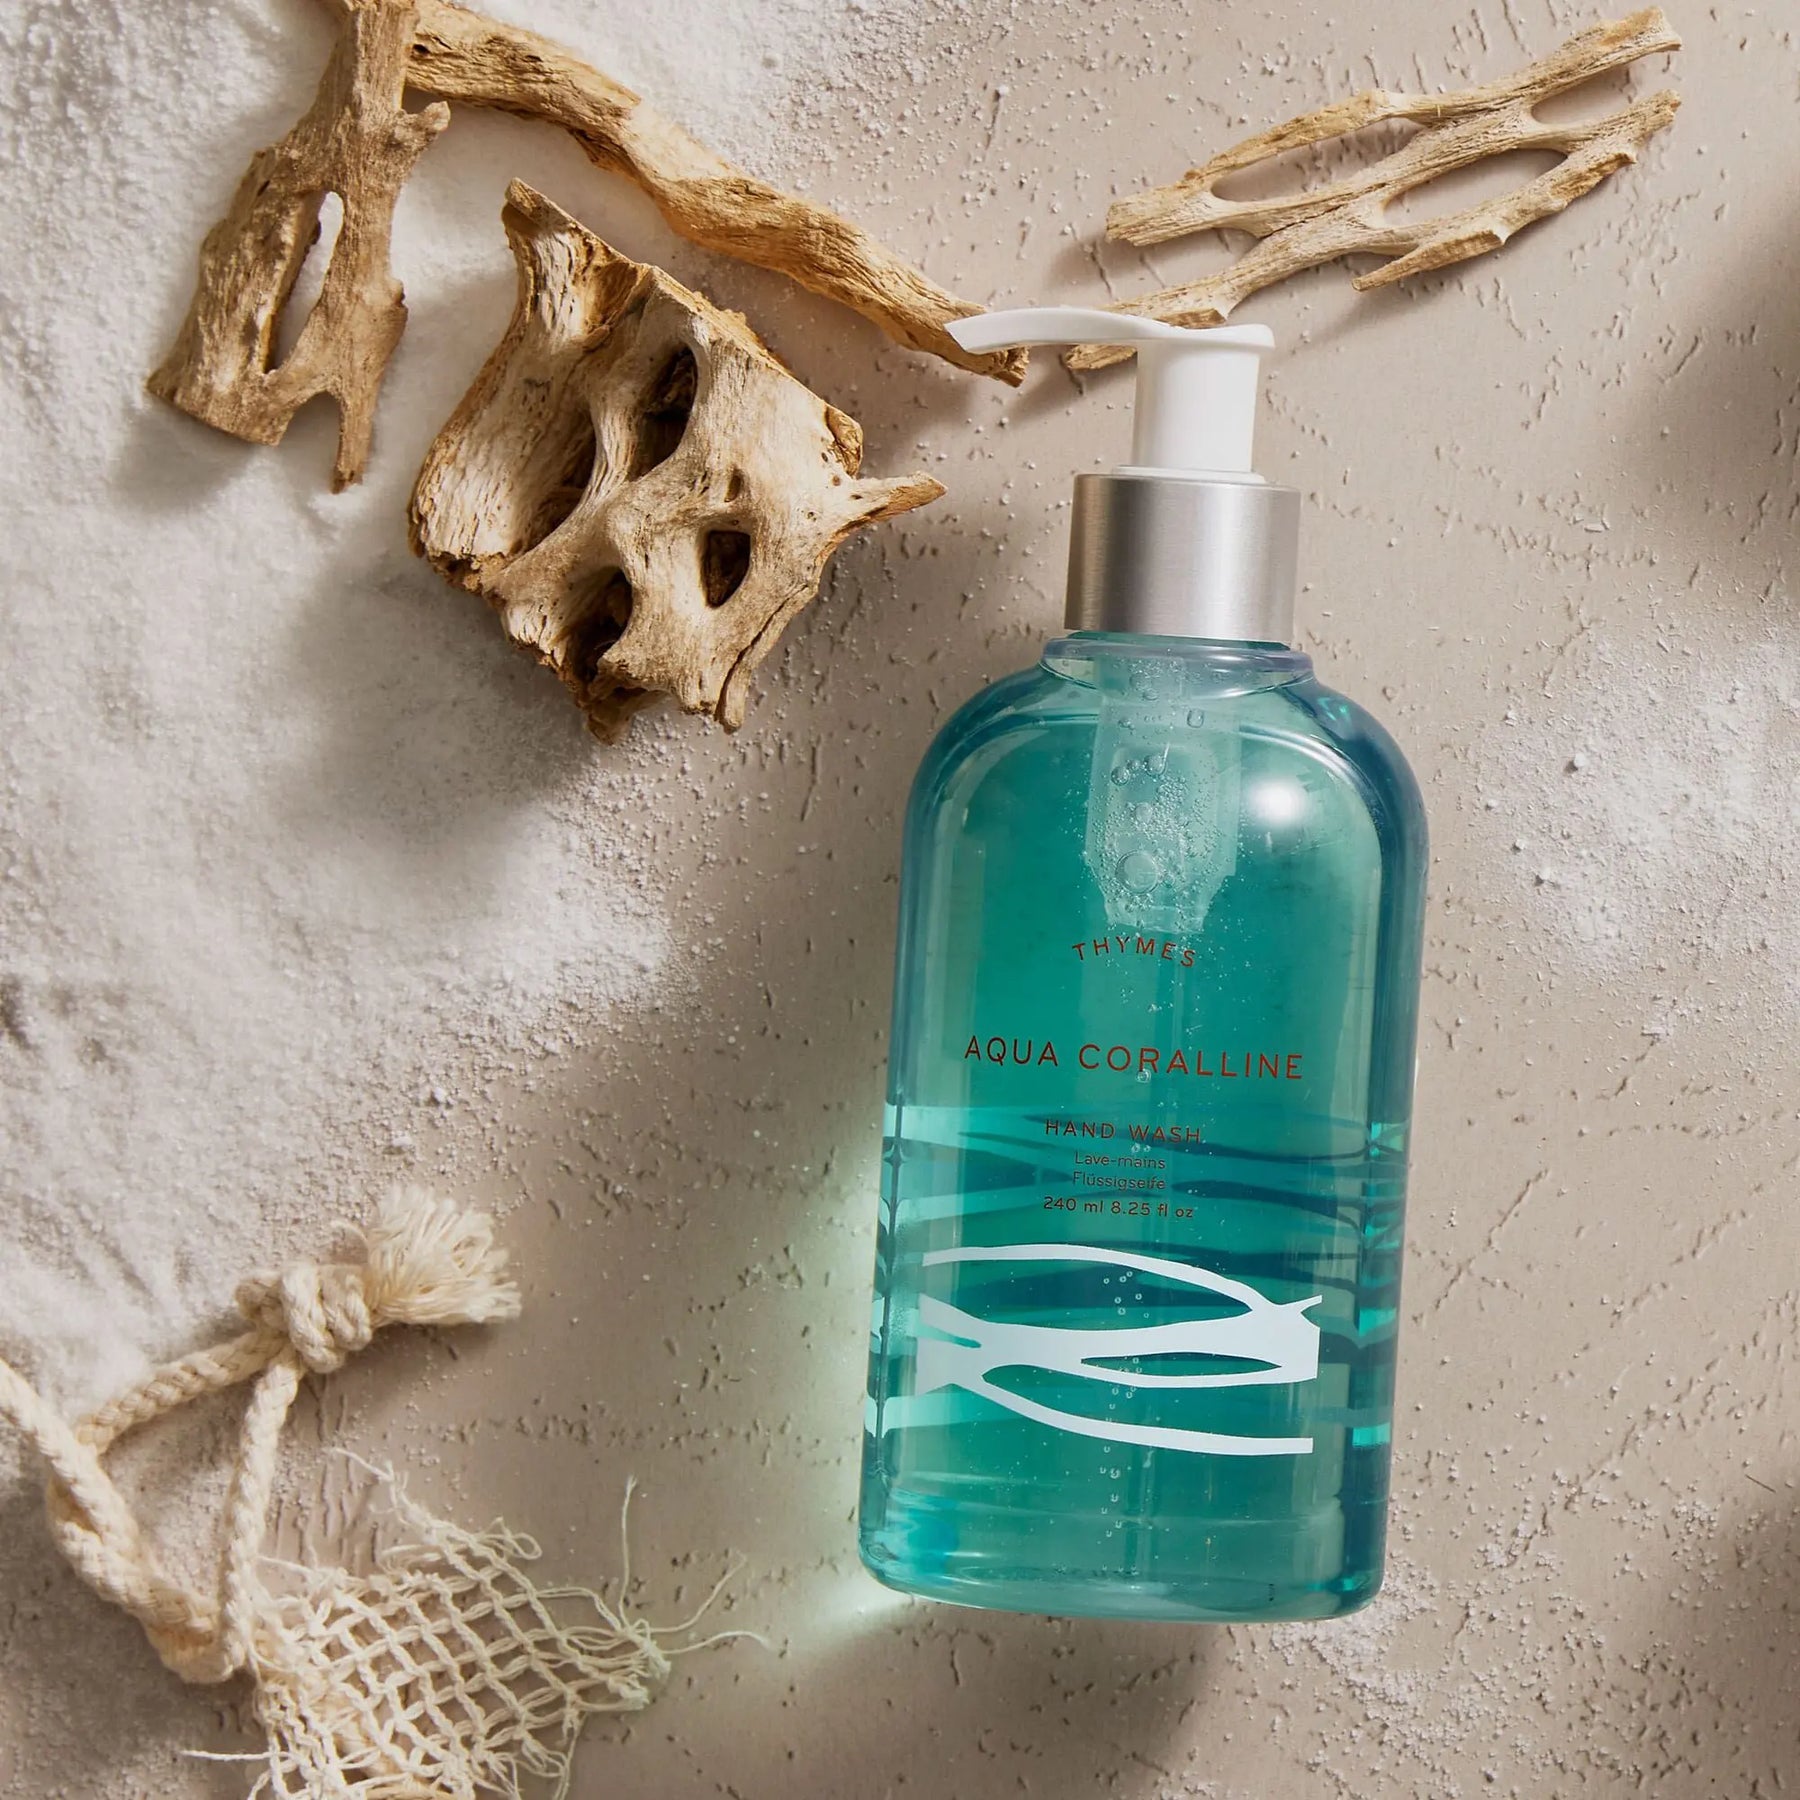 Thymes Aqua Coralline Hand Wash 240 milliliter 8.25 fluid ounce laid on the floor by some driftwood